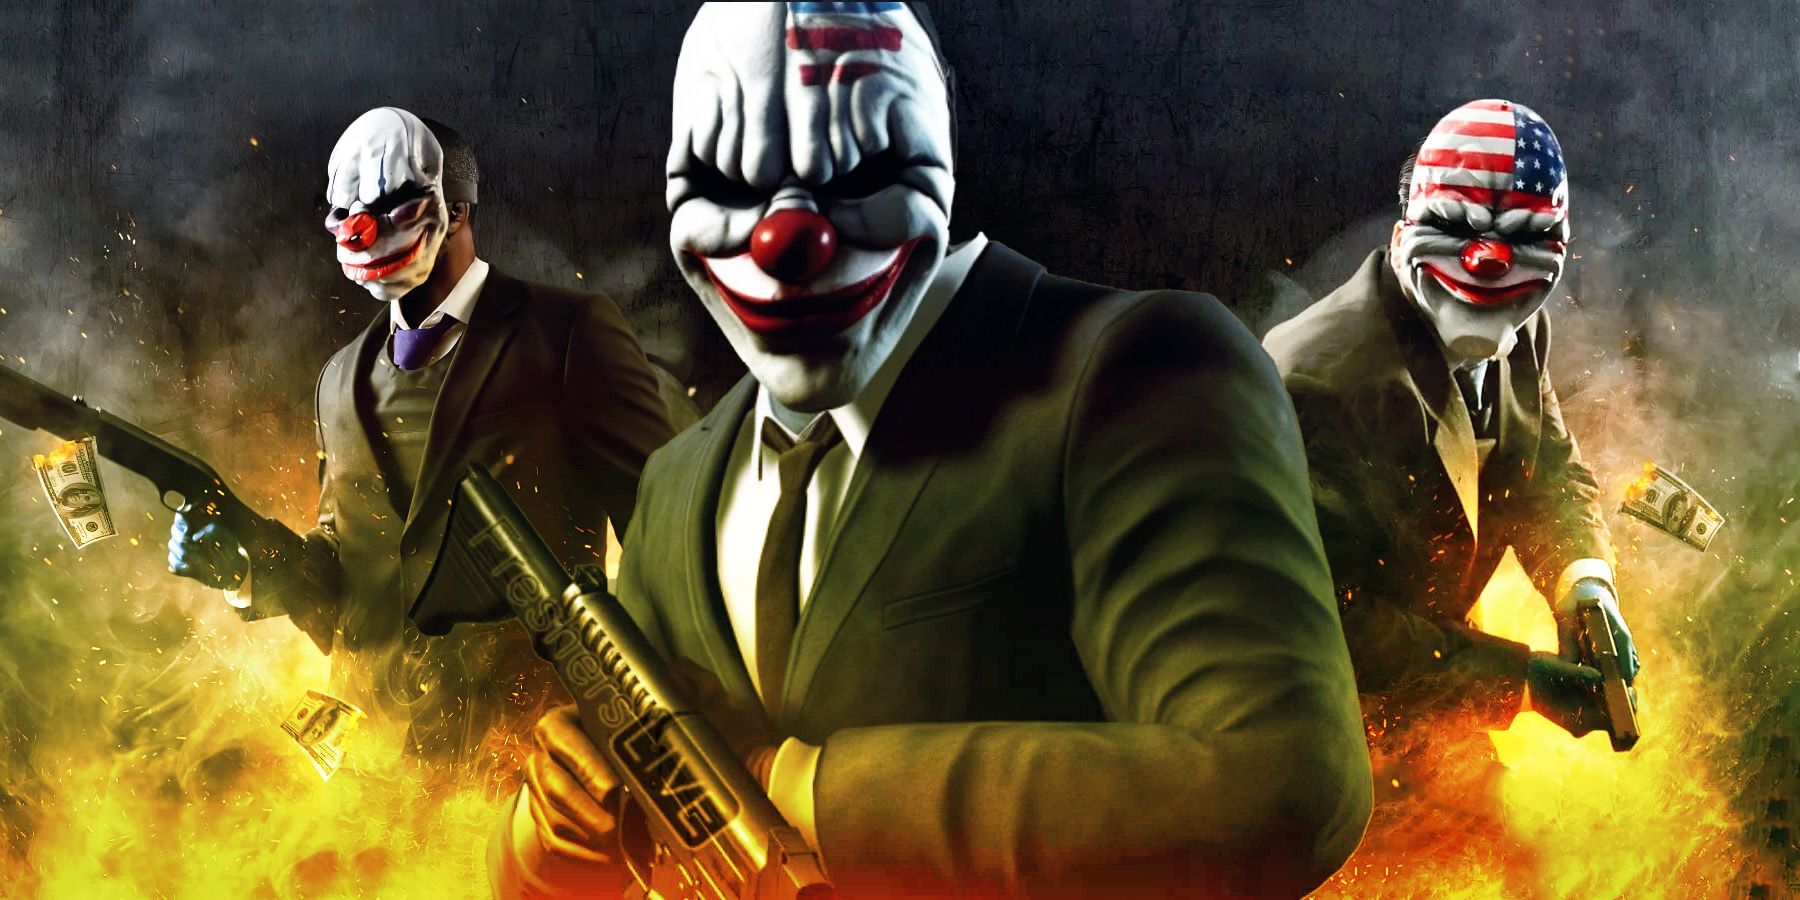 In Payday 3, using a stealth build allows you to complete the most intricate heists undetected.